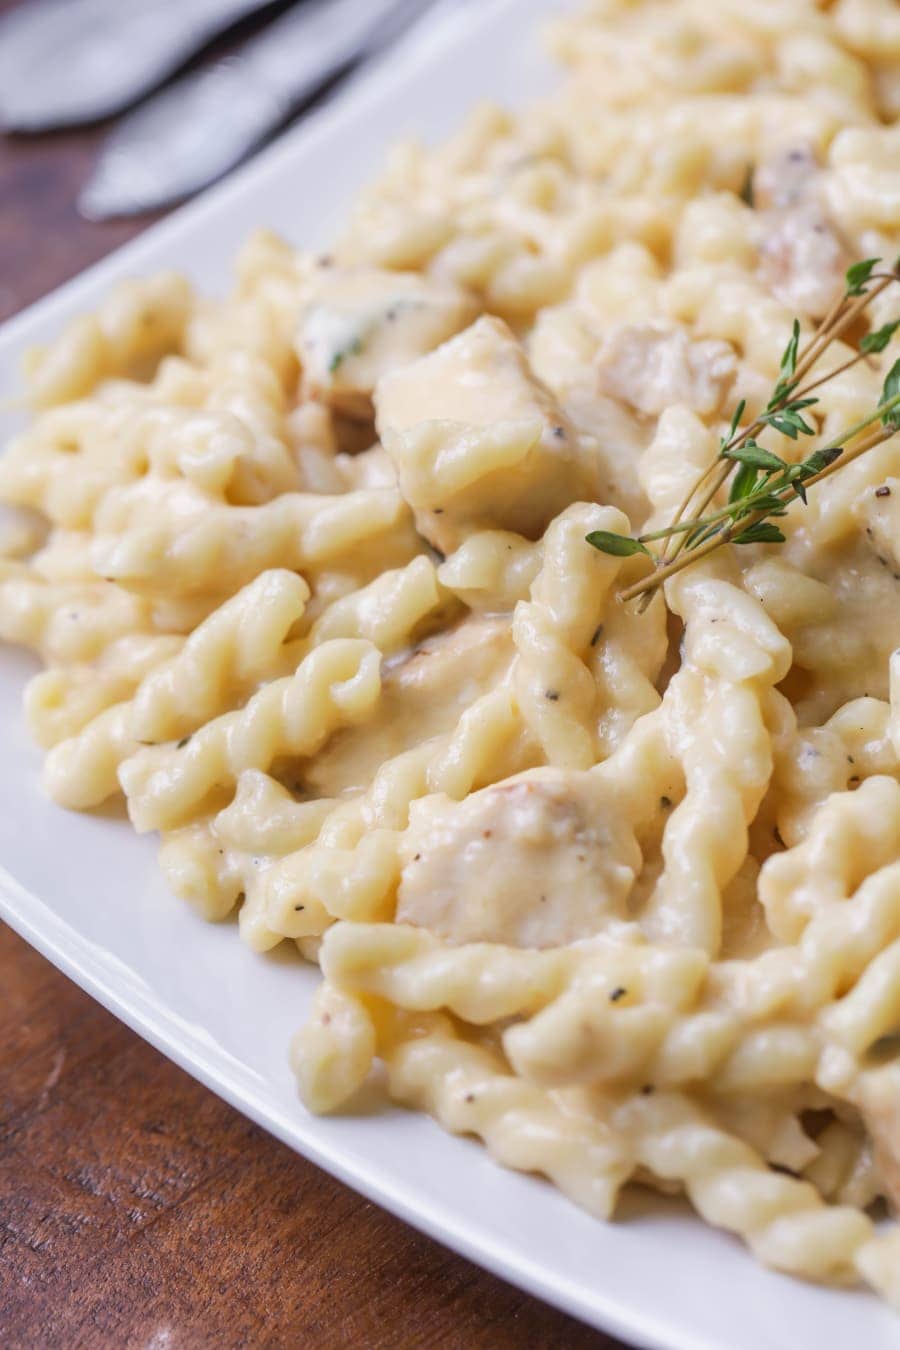 Easy Pasta Recipes - Triple cheddar chicken pasta on a white plate.